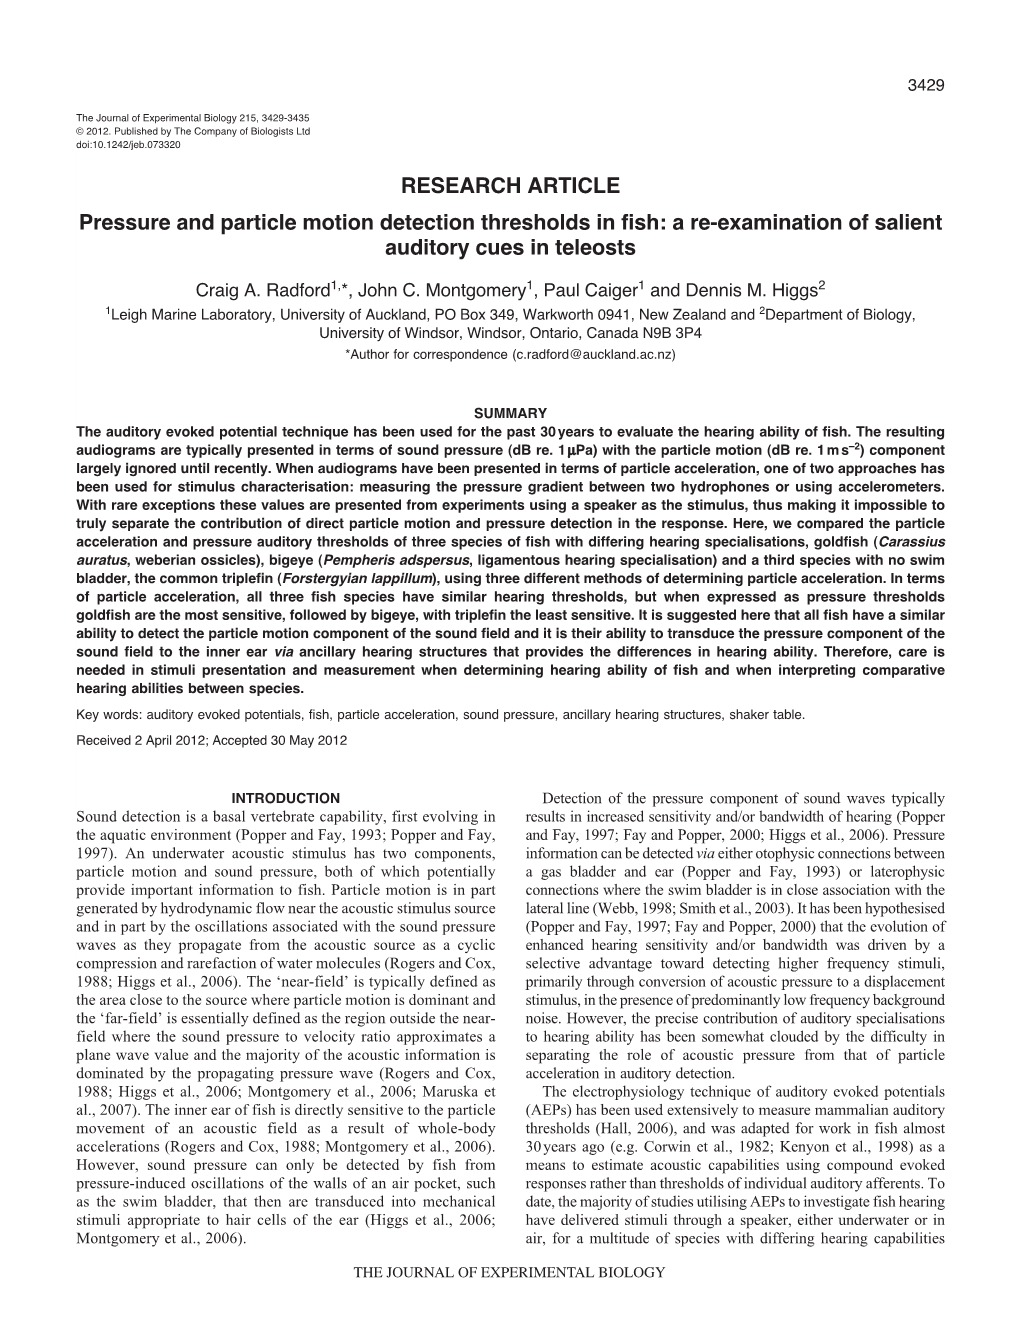 RESEARCH ARTICLE Pressure and Particle Motion Detection Thresholds in Fish: a Re-Examination of Salient Auditory Cues in Teleosts